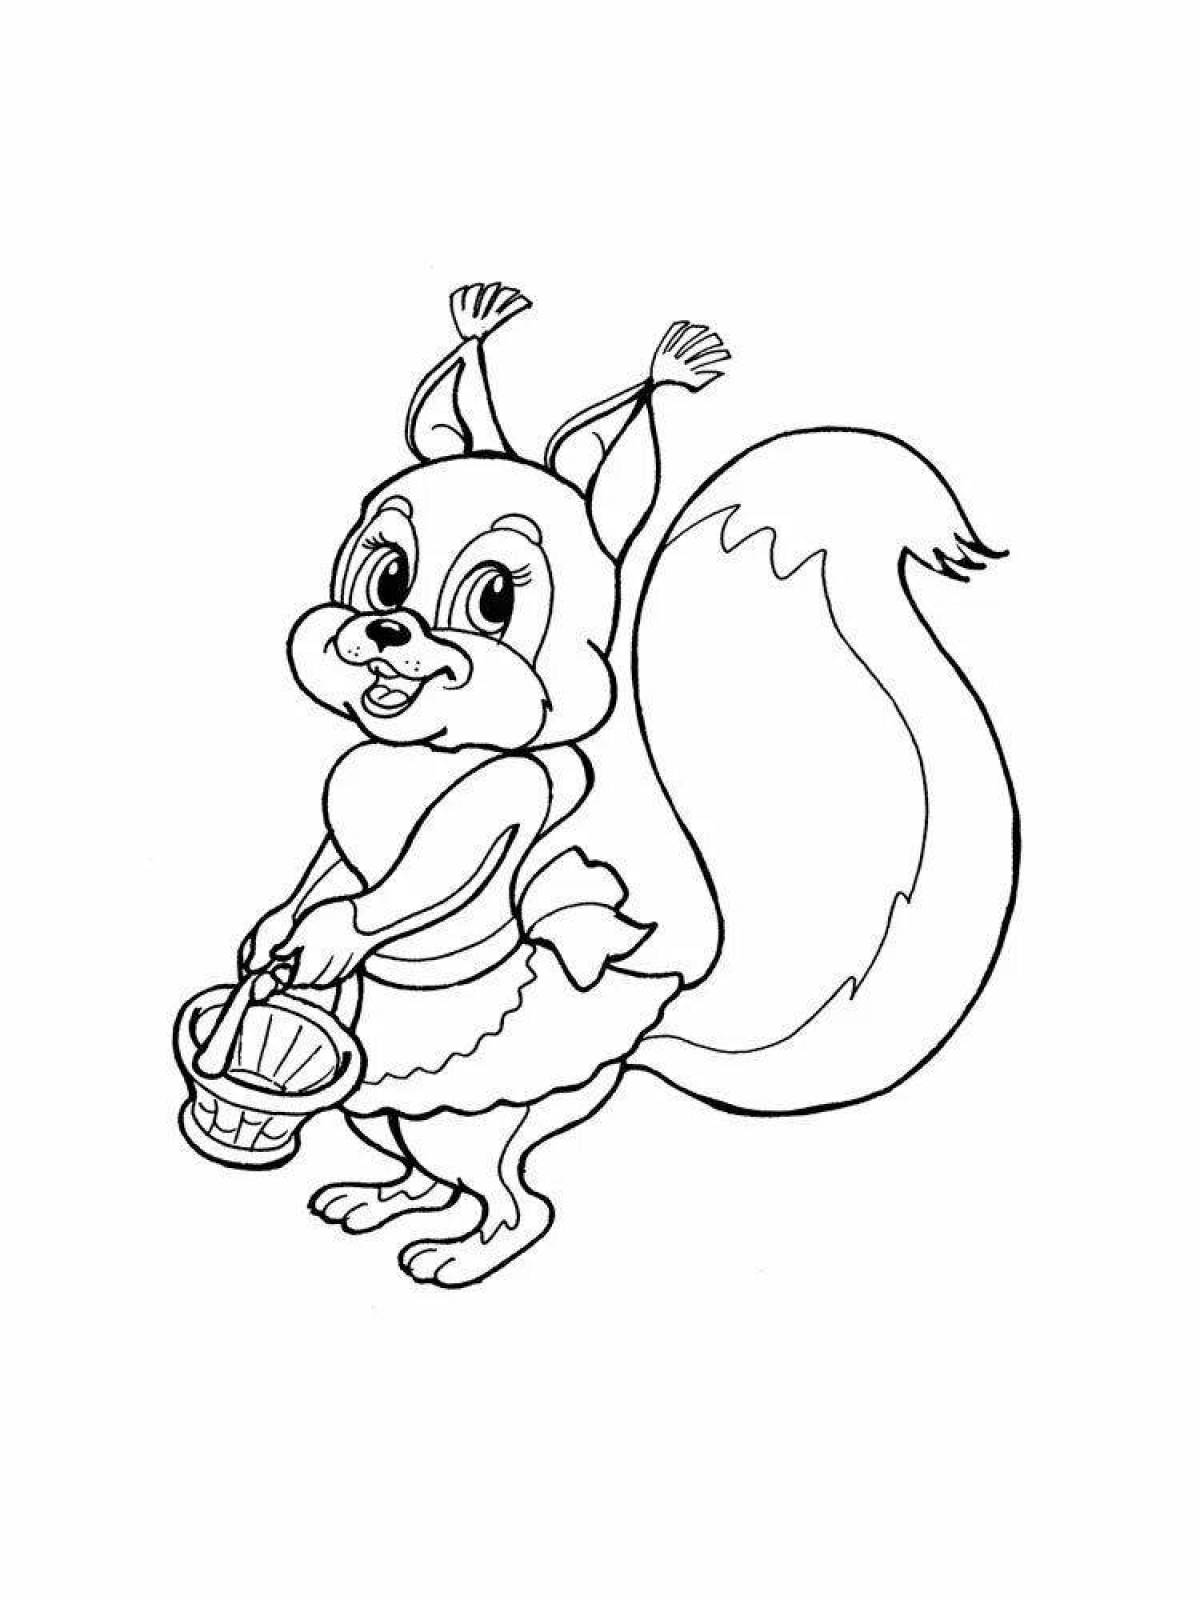 Bright squirrel coloring for kids